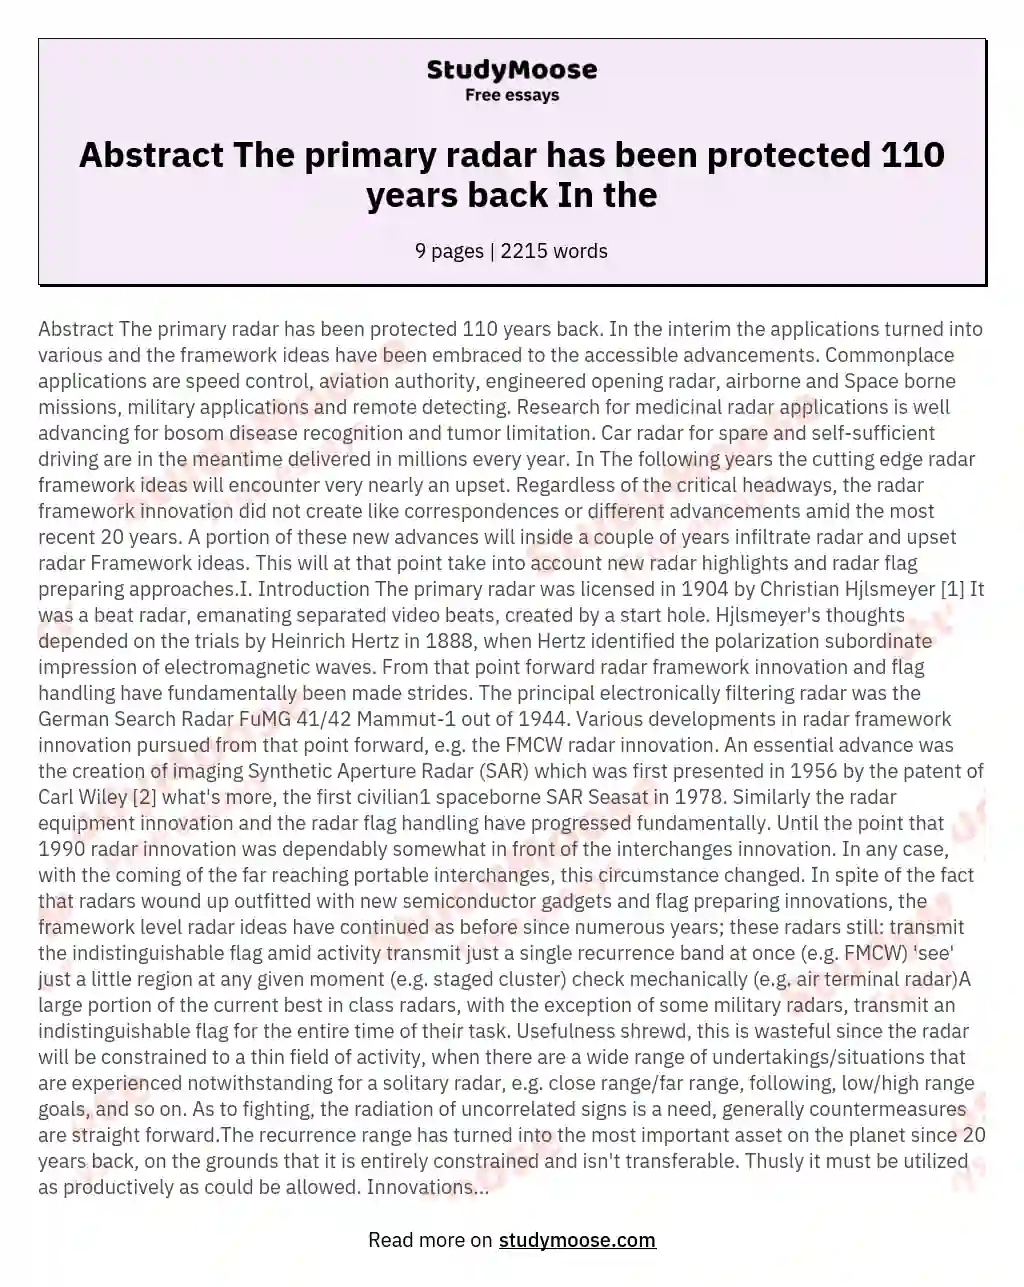 Abstract The primary radar has been protected 110 years back In the